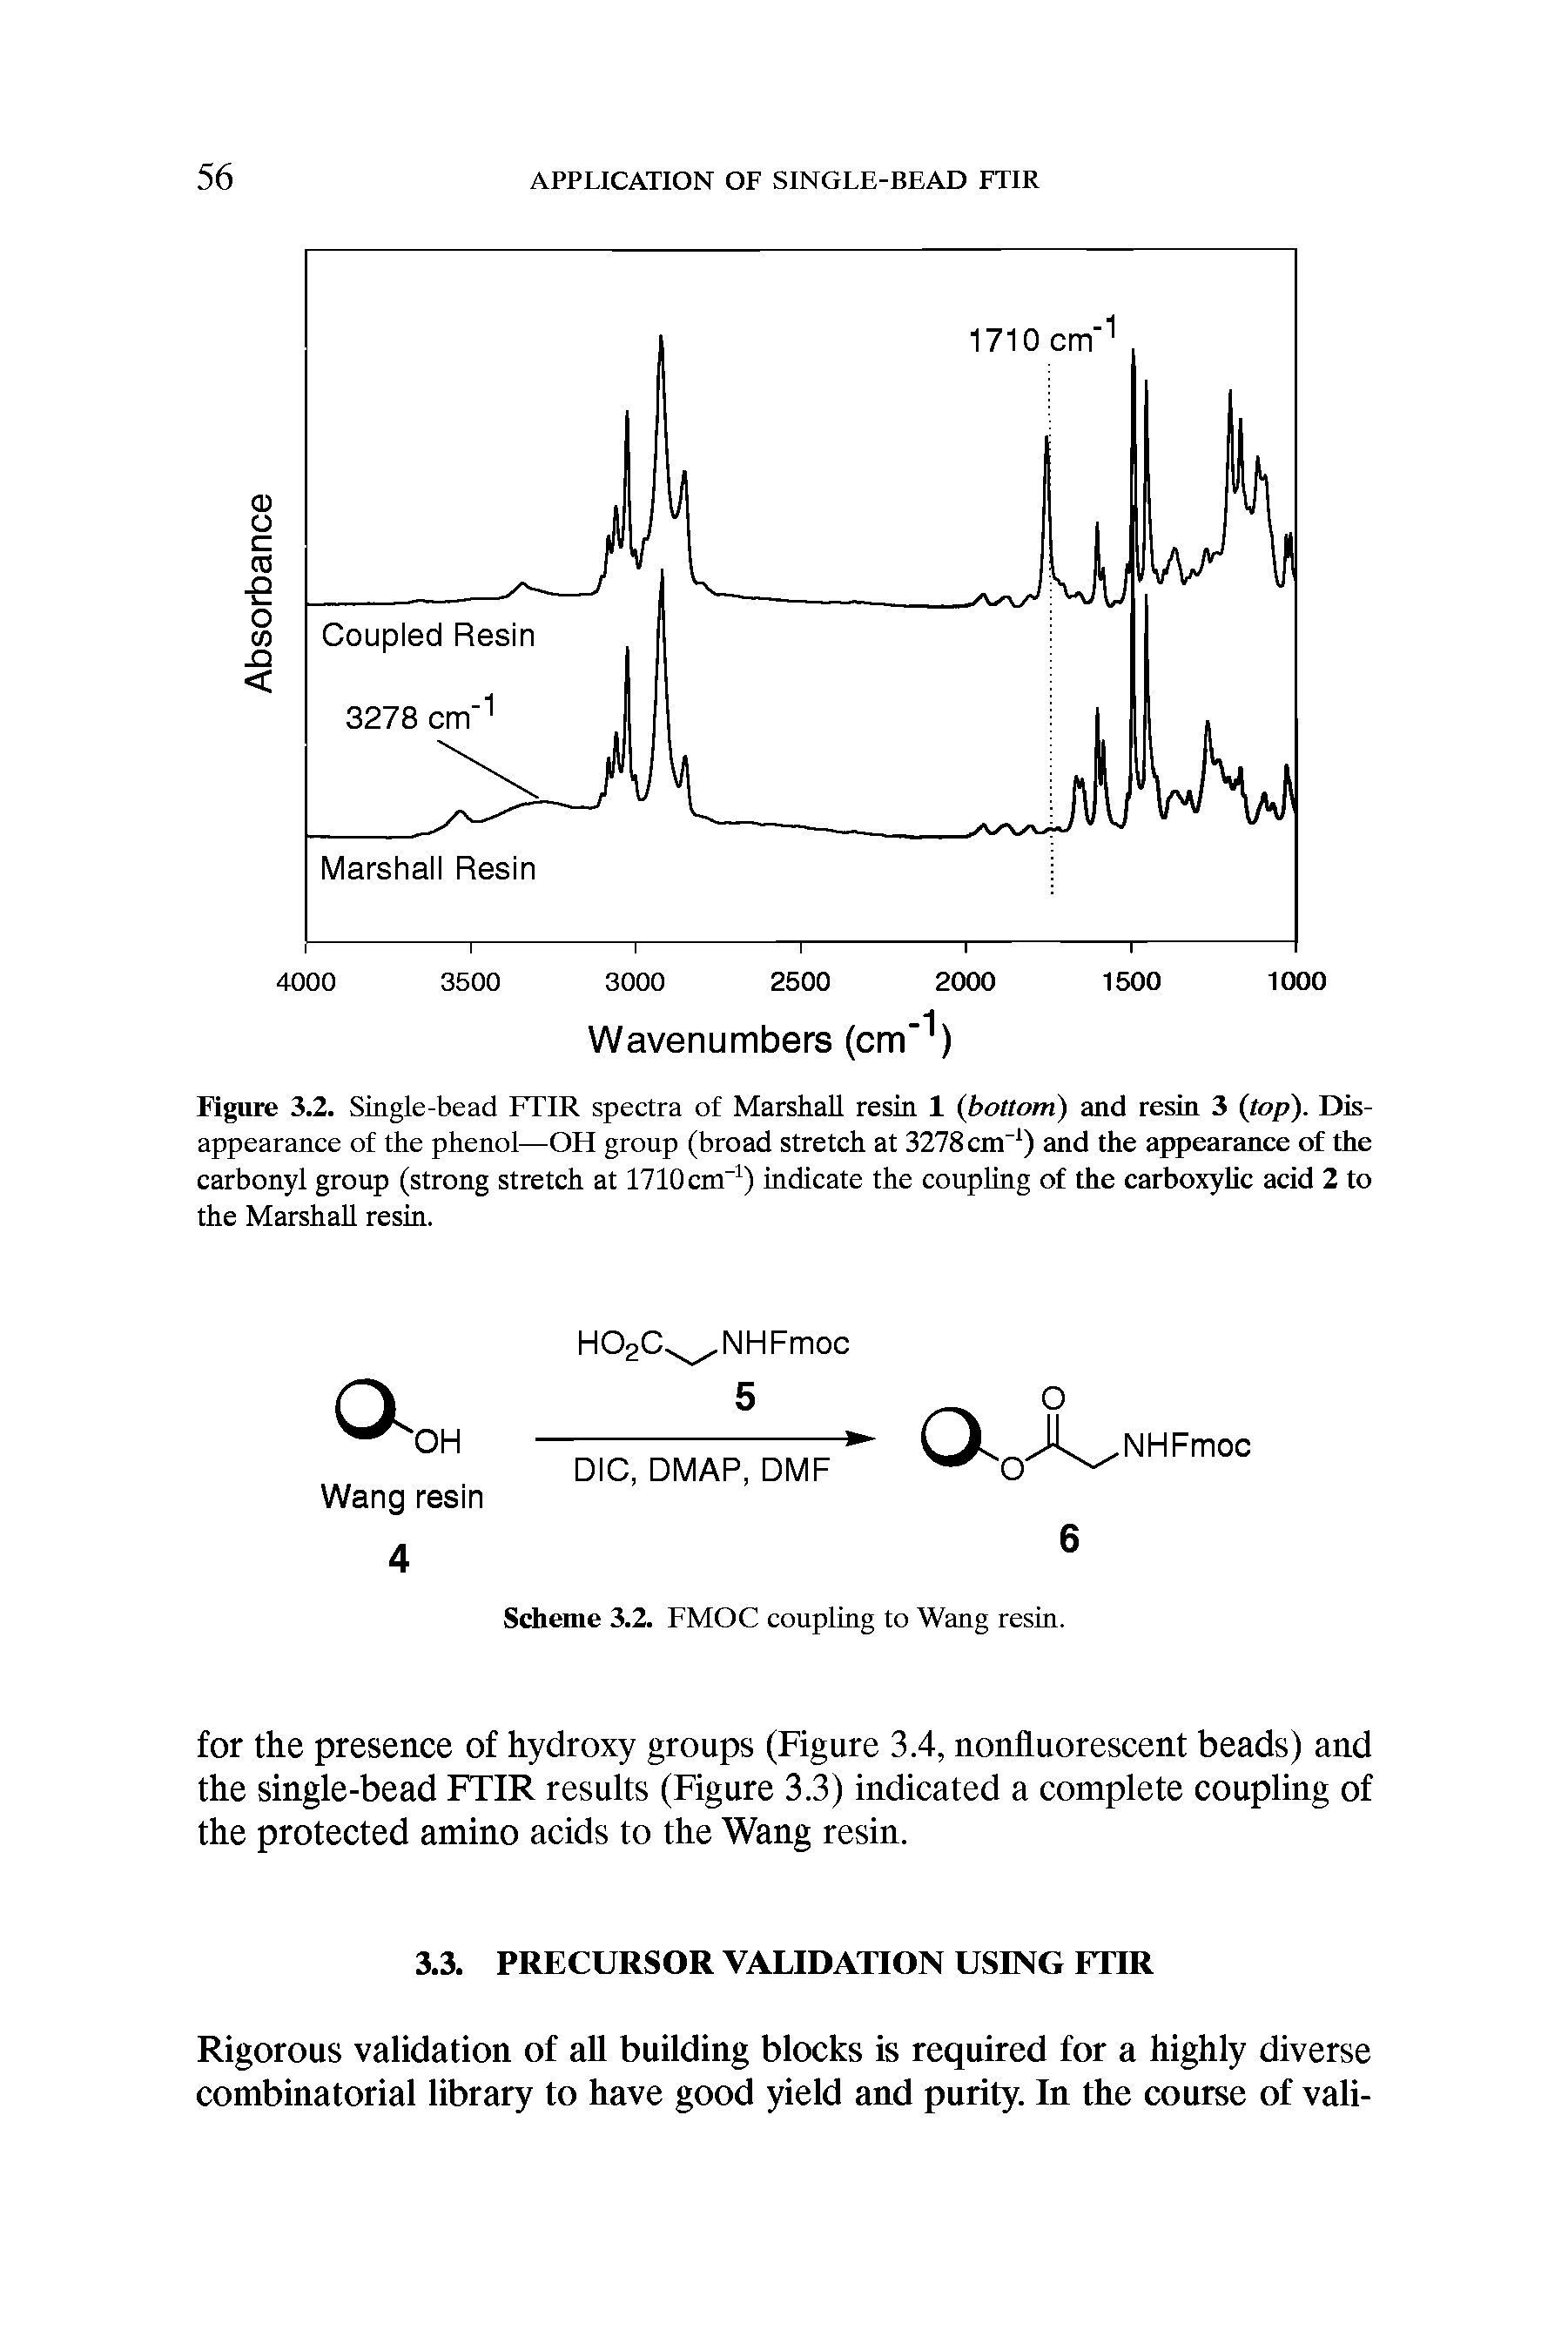 Figure 3.2. Single-bead FTIR spectra of Marshall resin 1 (bottom) and resin 3 (top). Disappearance of the phenol—OH group (broad stretch at 3278cnr ) and the appearance of the carbonyl group (strong stretch at 1710 cm" ) indicate the coupling of the carboxylic acid 2 to the Marshall resin.